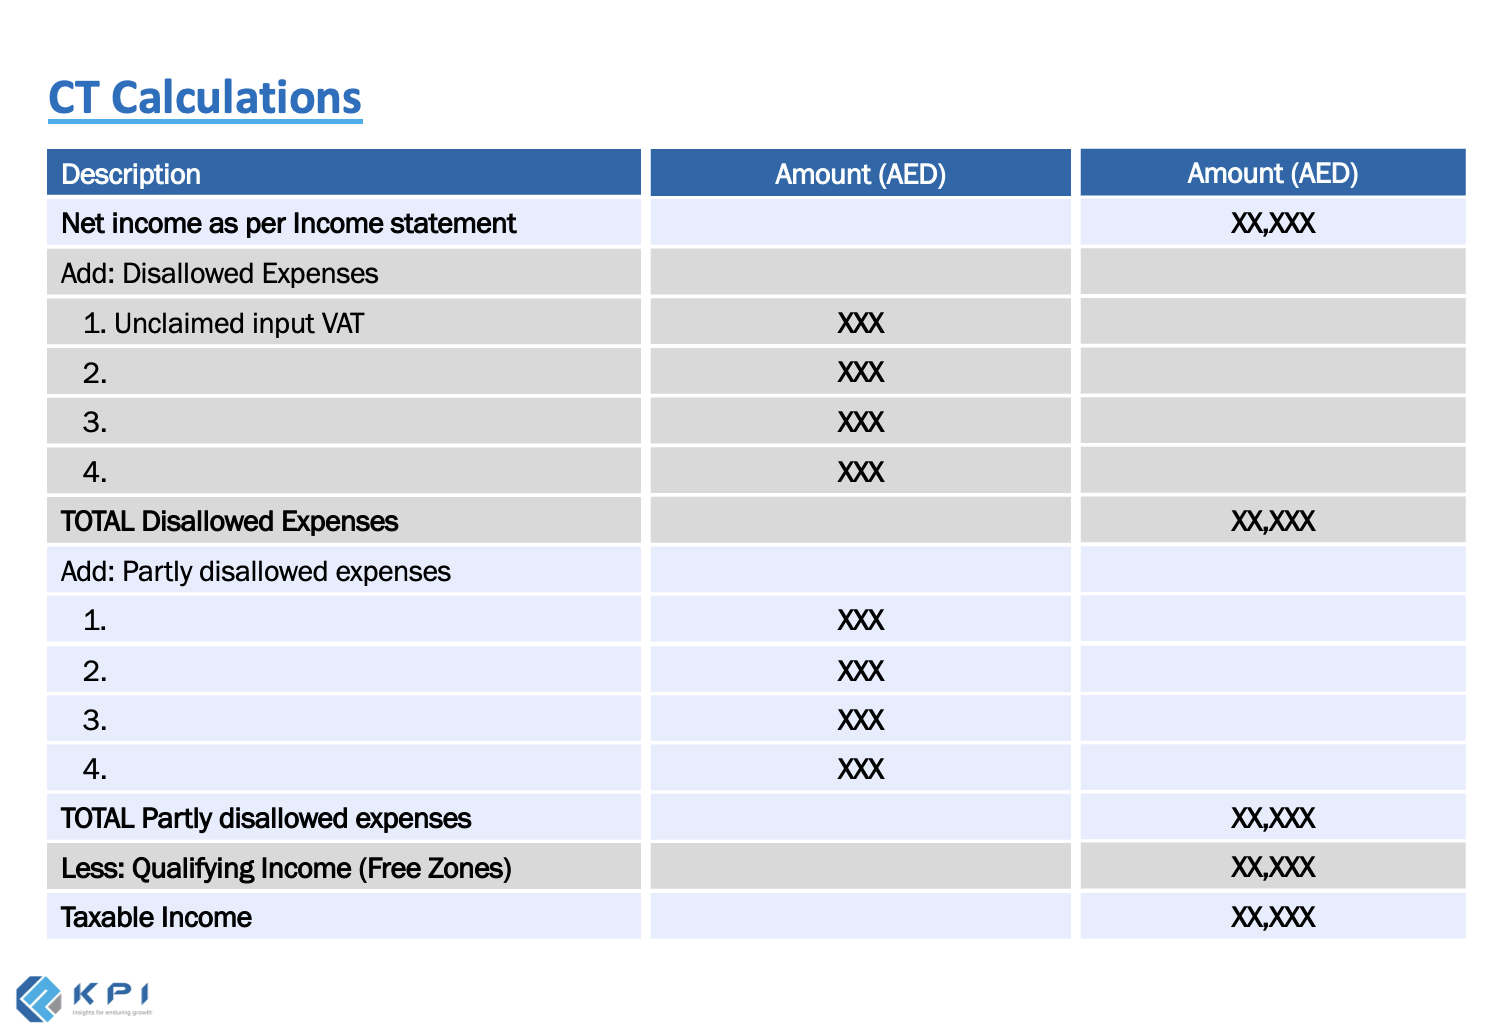 Corporate Tax Calculations Image